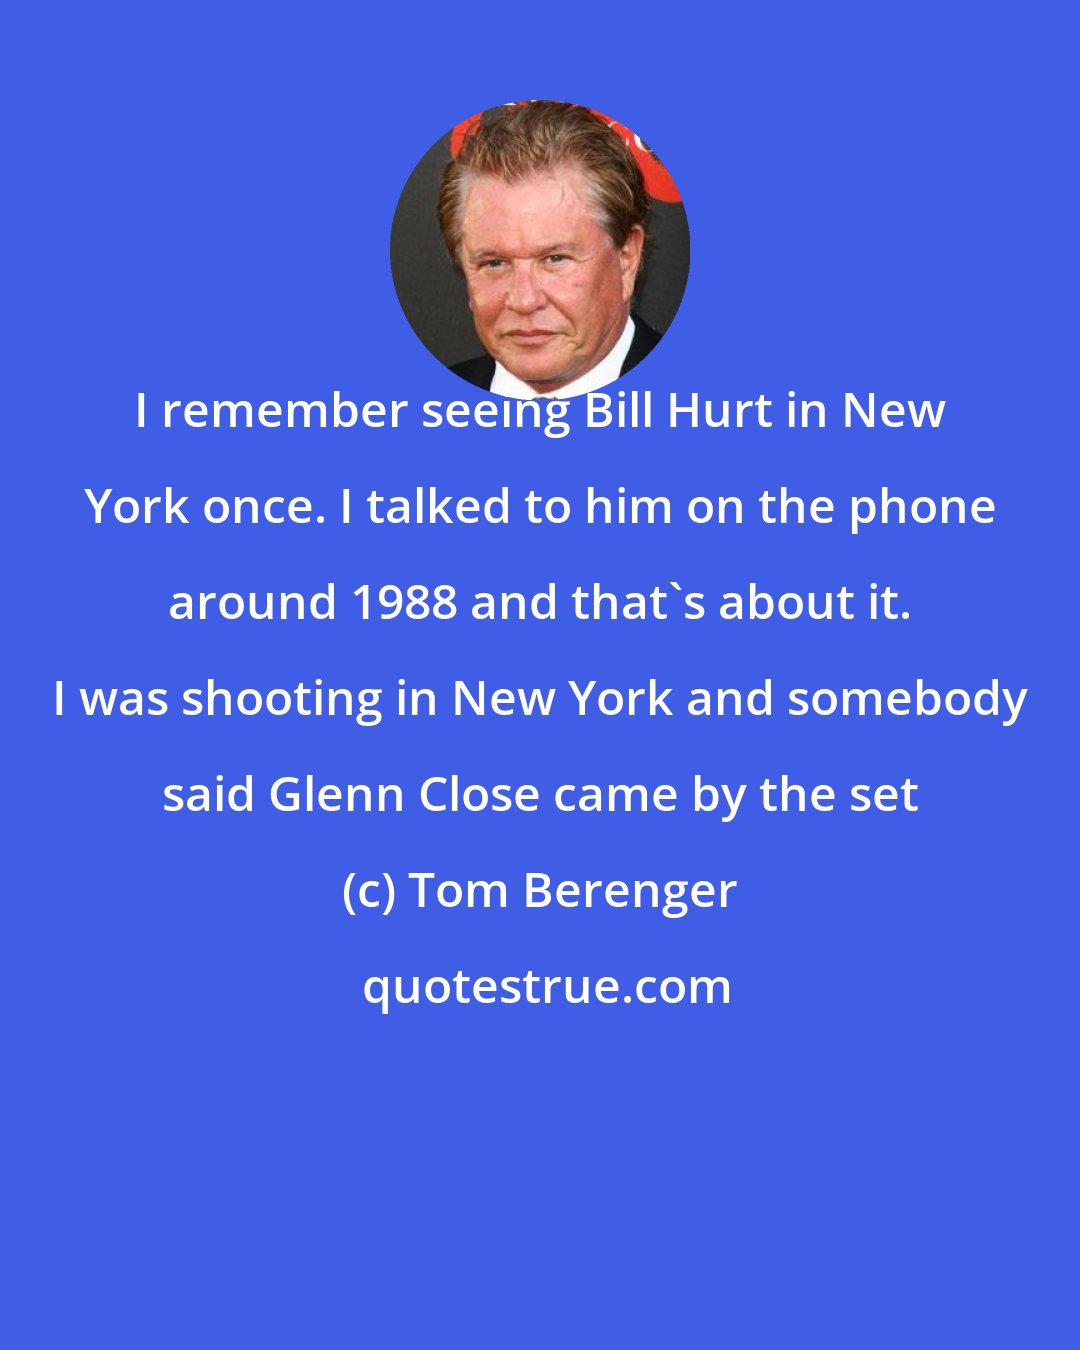 Tom Berenger: I remember seeing Bill Hurt in New York once. I talked to him on the phone around 1988 and that's about it. I was shooting in New York and somebody said Glenn Close came by the set